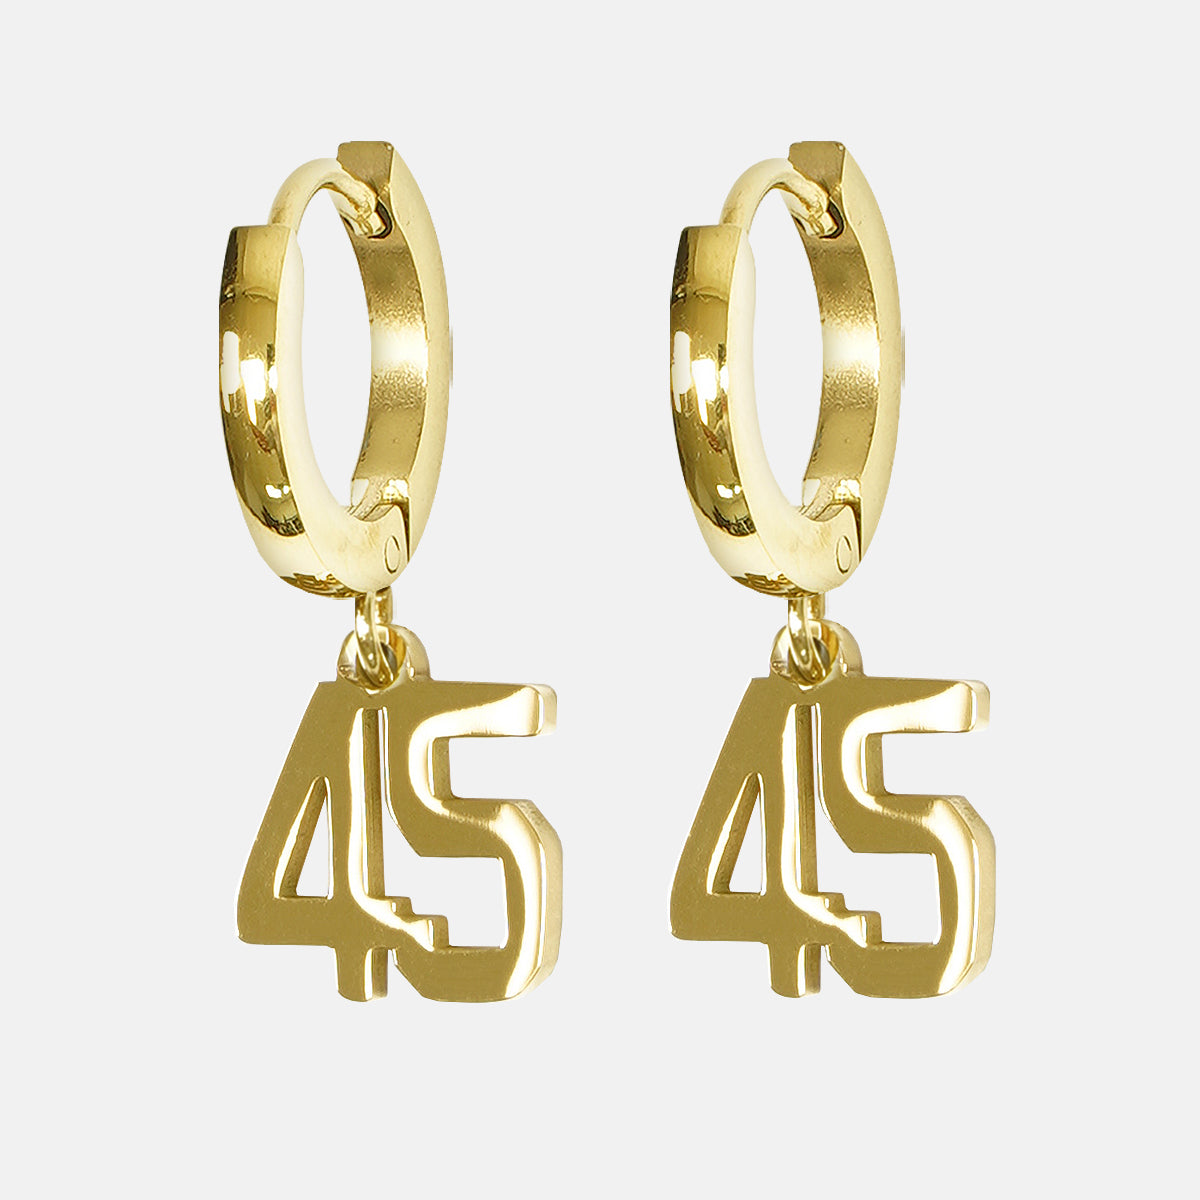 45 Number Earring - Gold Plated Stainless Steel